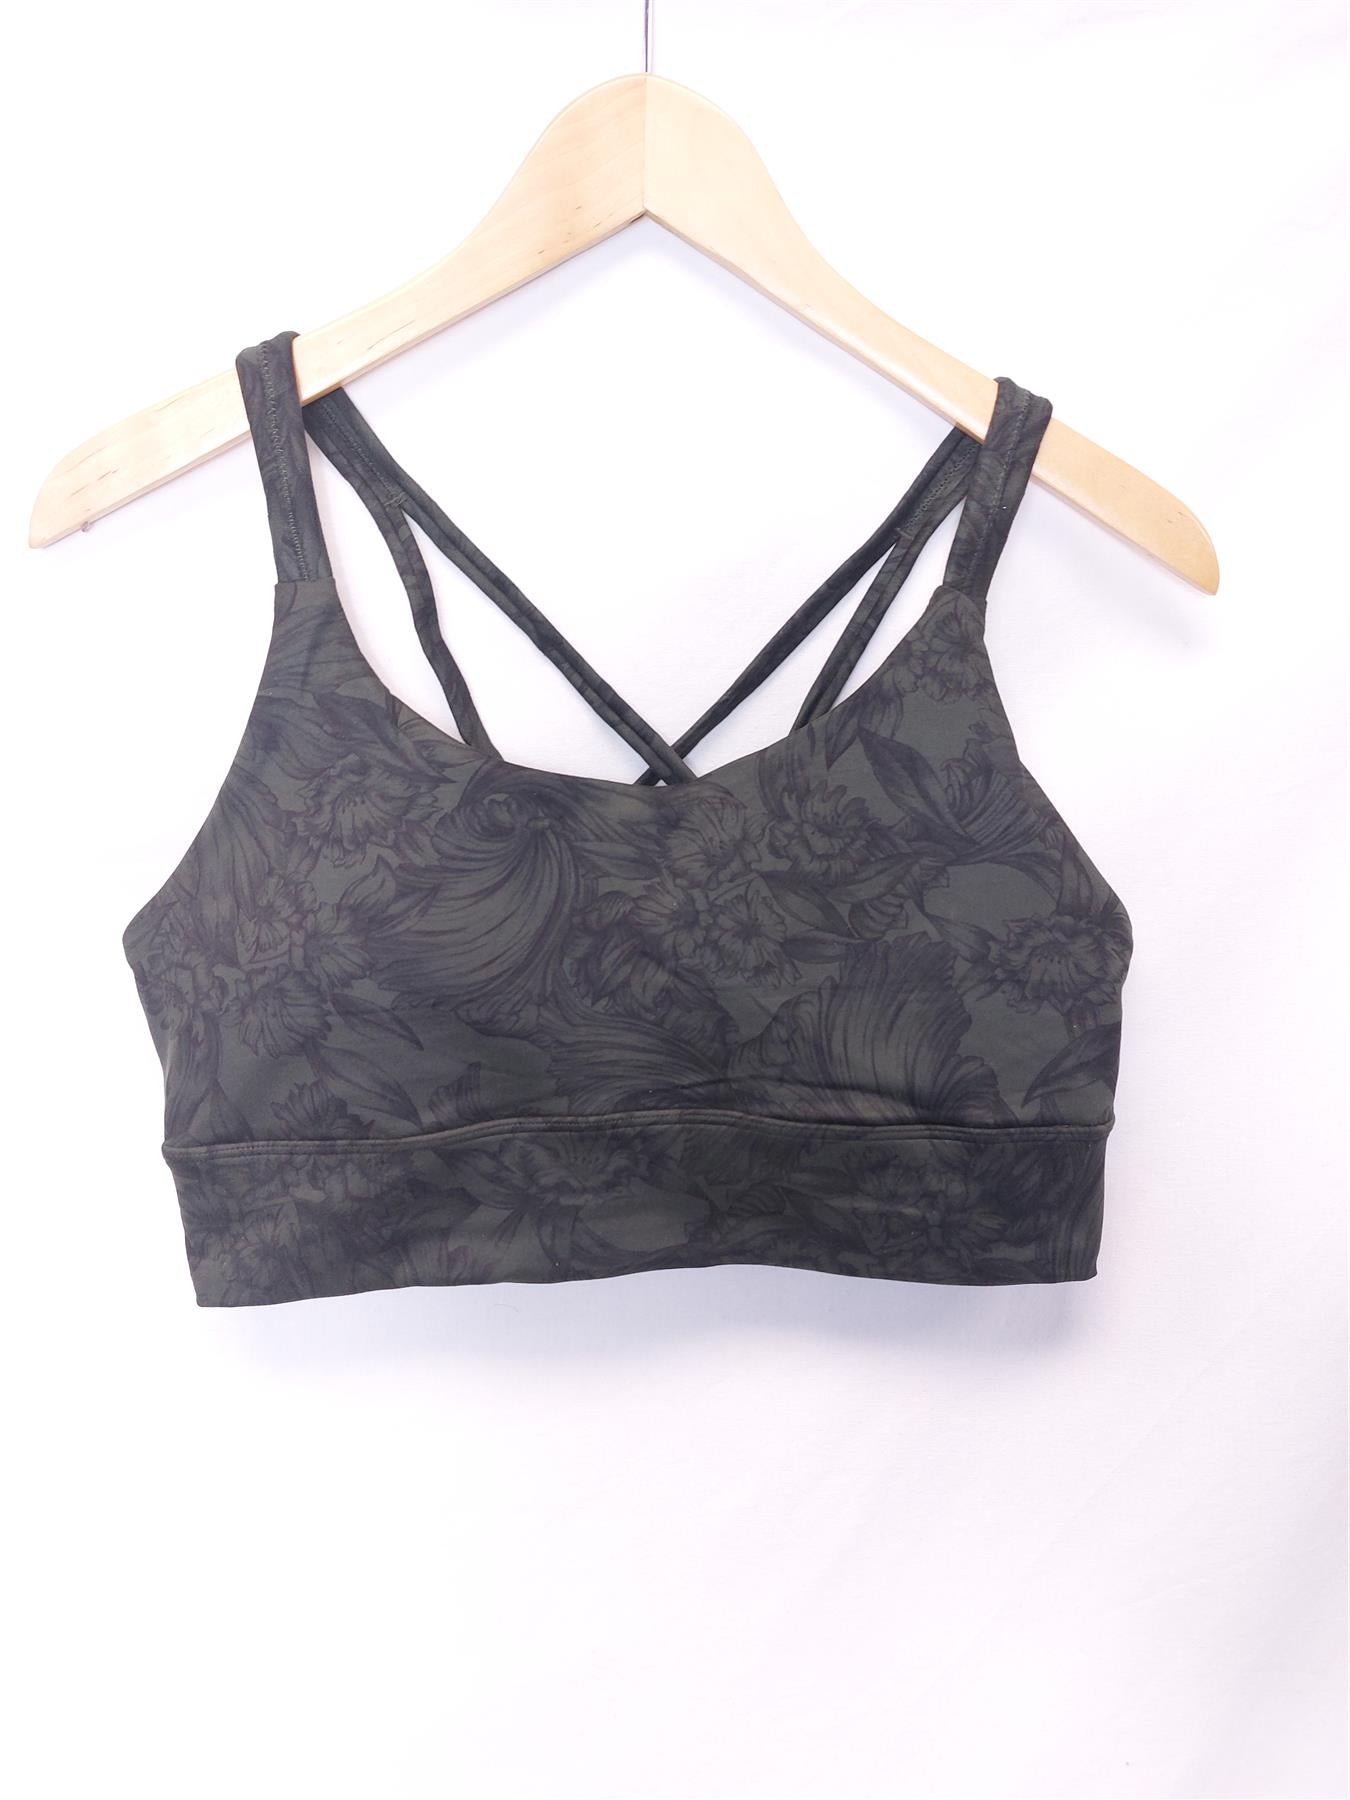 Yoga Top Sports Bra Marika/Zobha Floral Crop Supersoft Padded Non-Wired Comfort